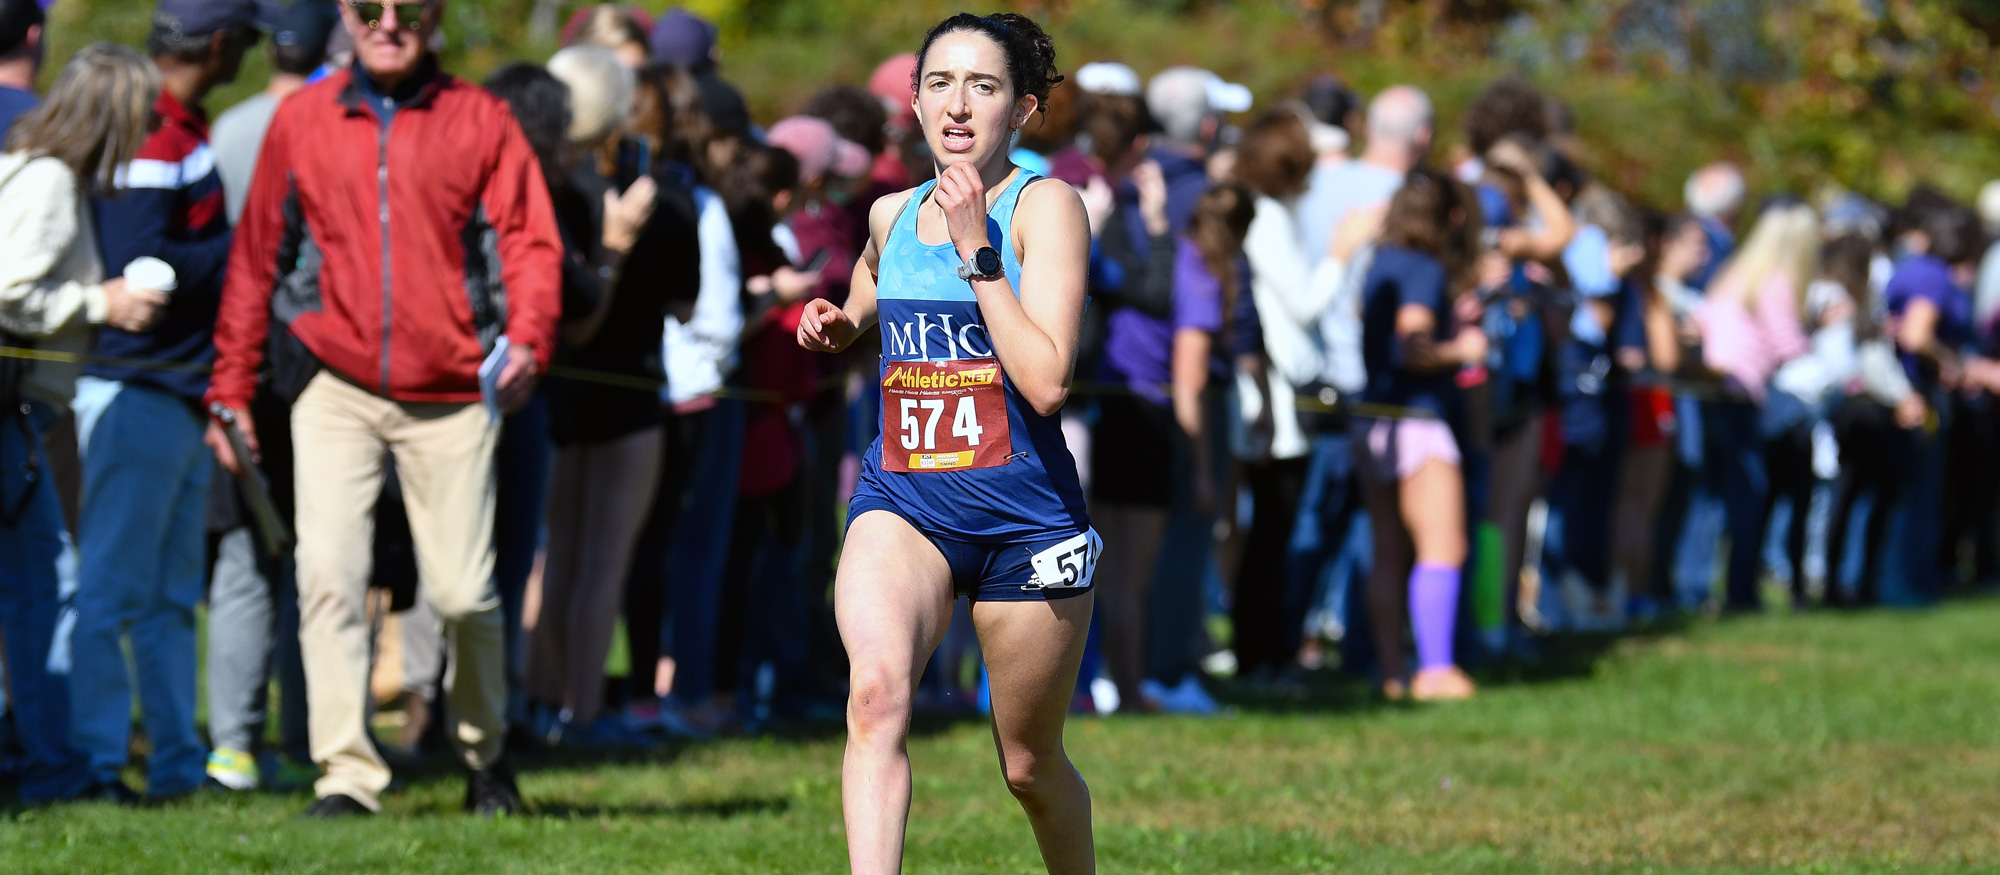 Lauren Selkin placed second out of 134 runners overall at the NEWMAC Cross Country Championships on Oct. 30, 2022 in Attleboro, Mass. (RJB Sports file photo)